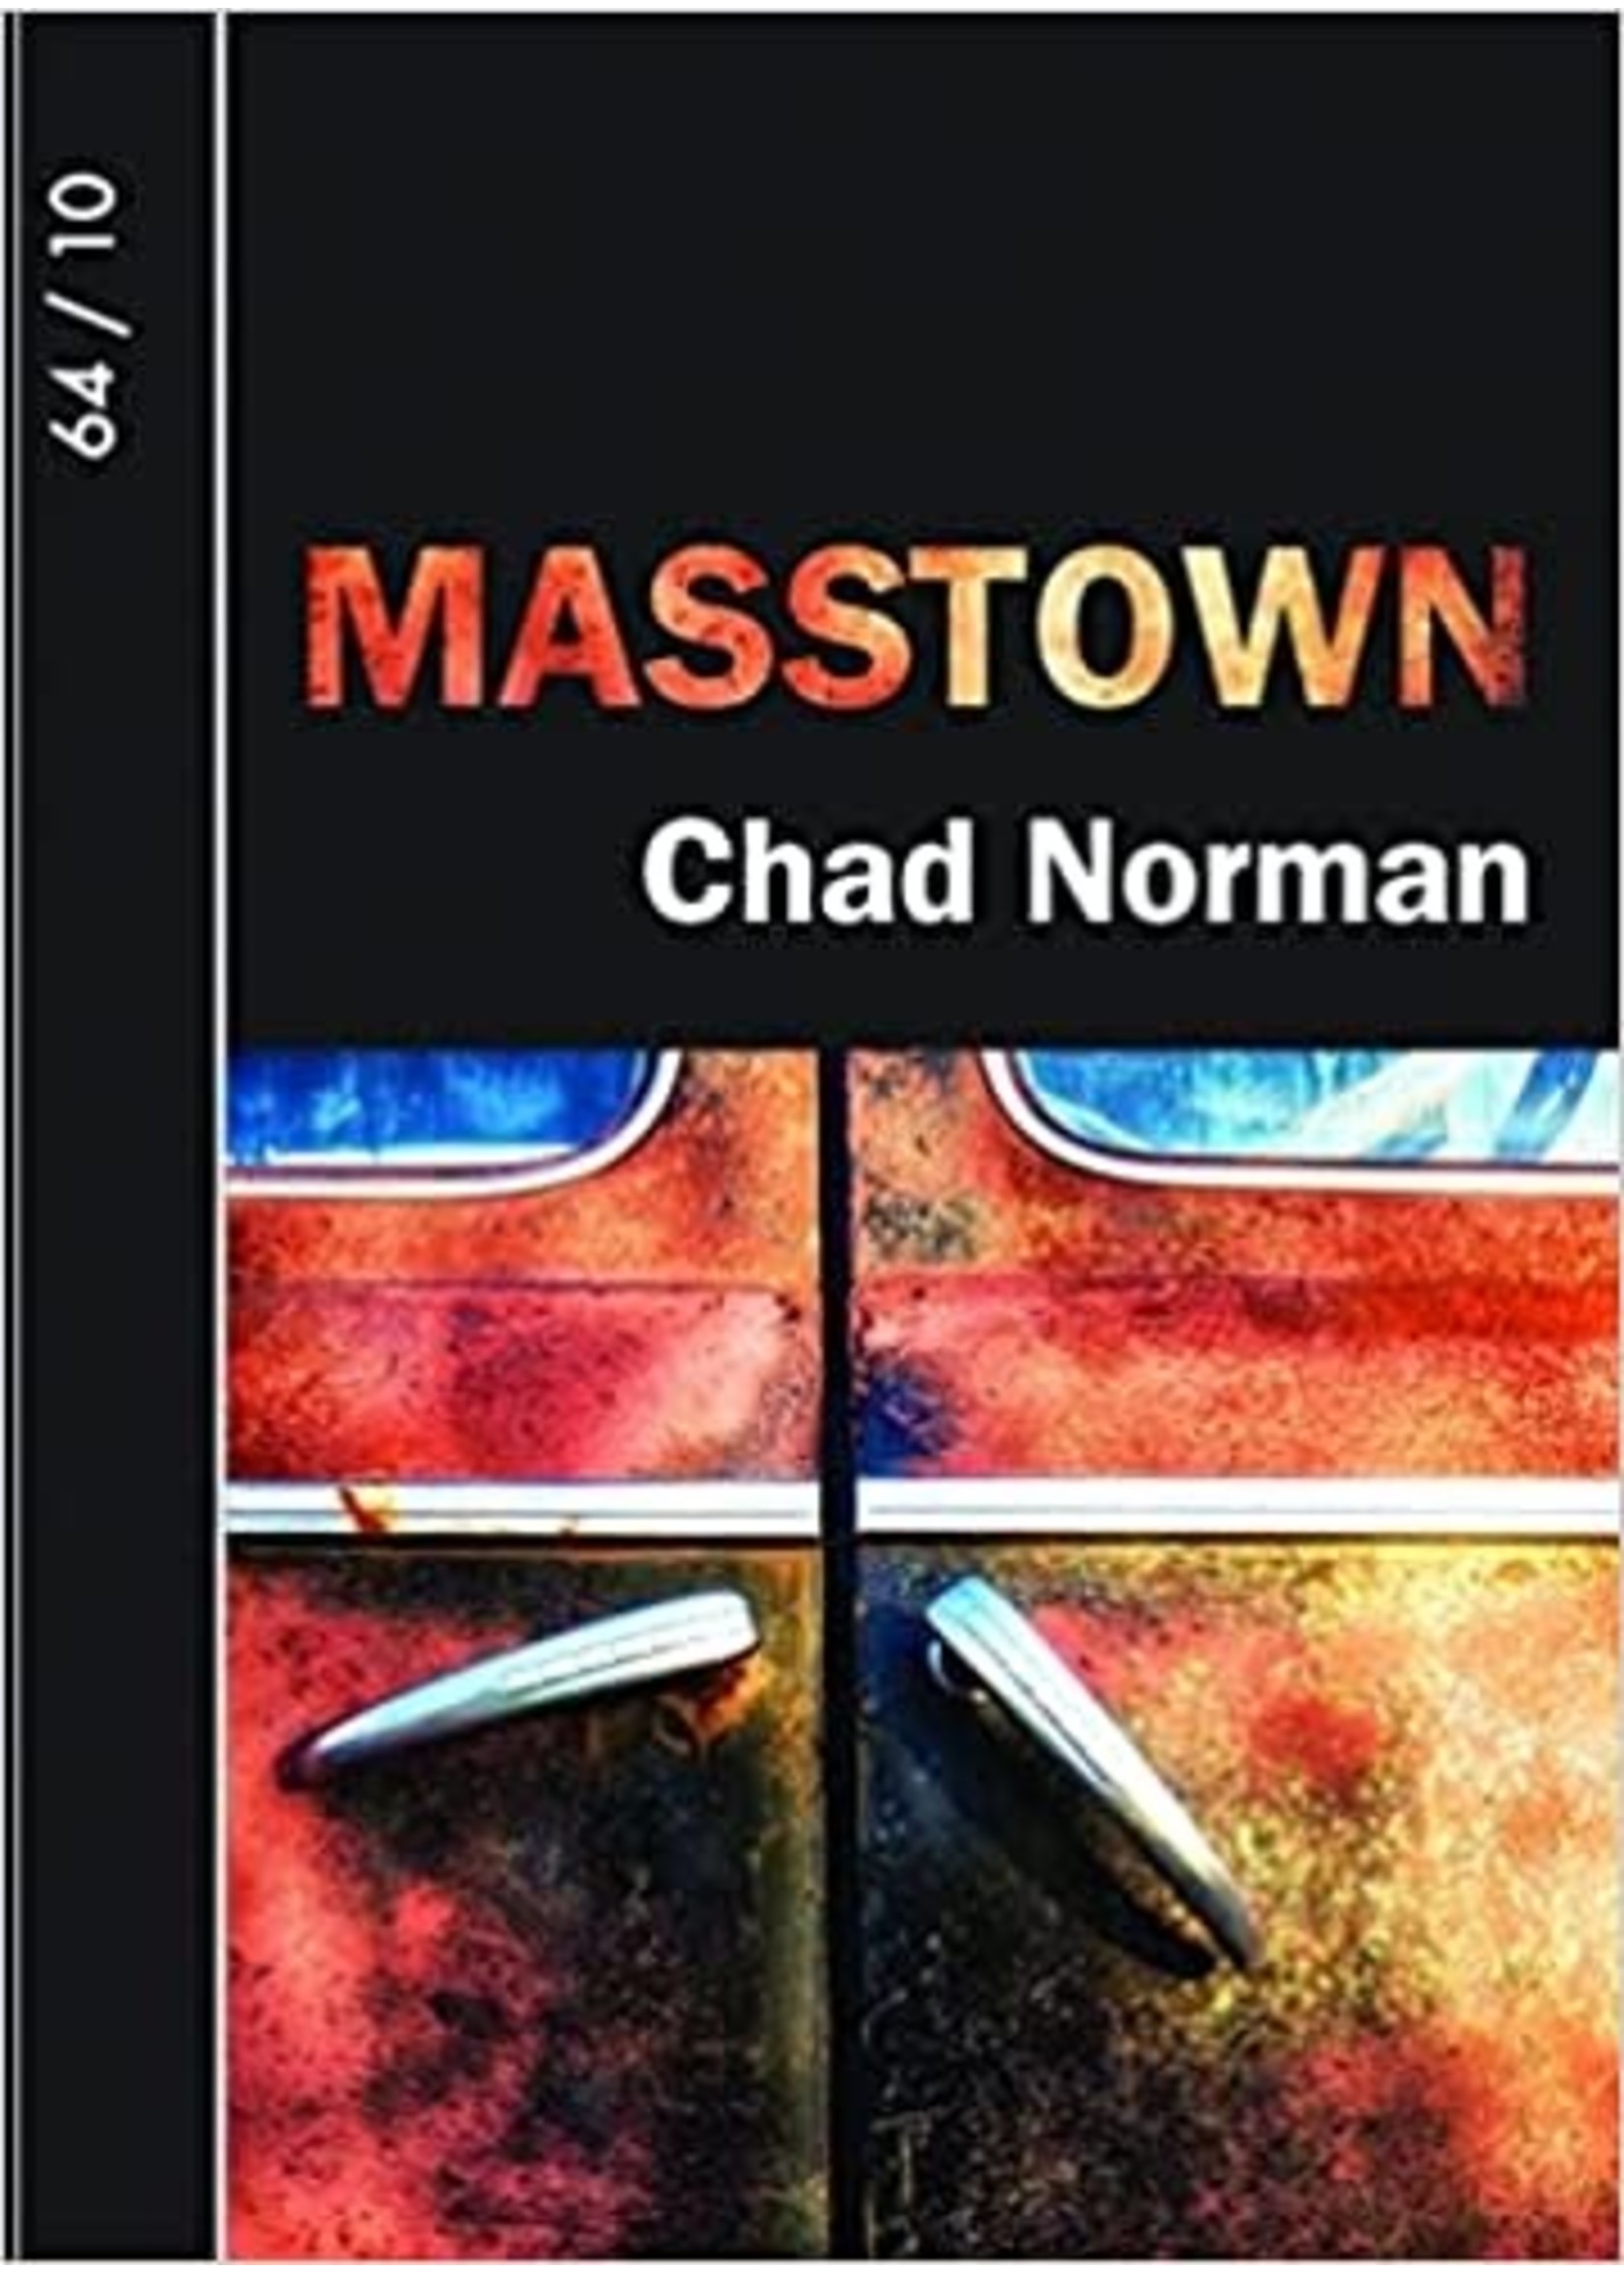 Masstown by Chad Norman